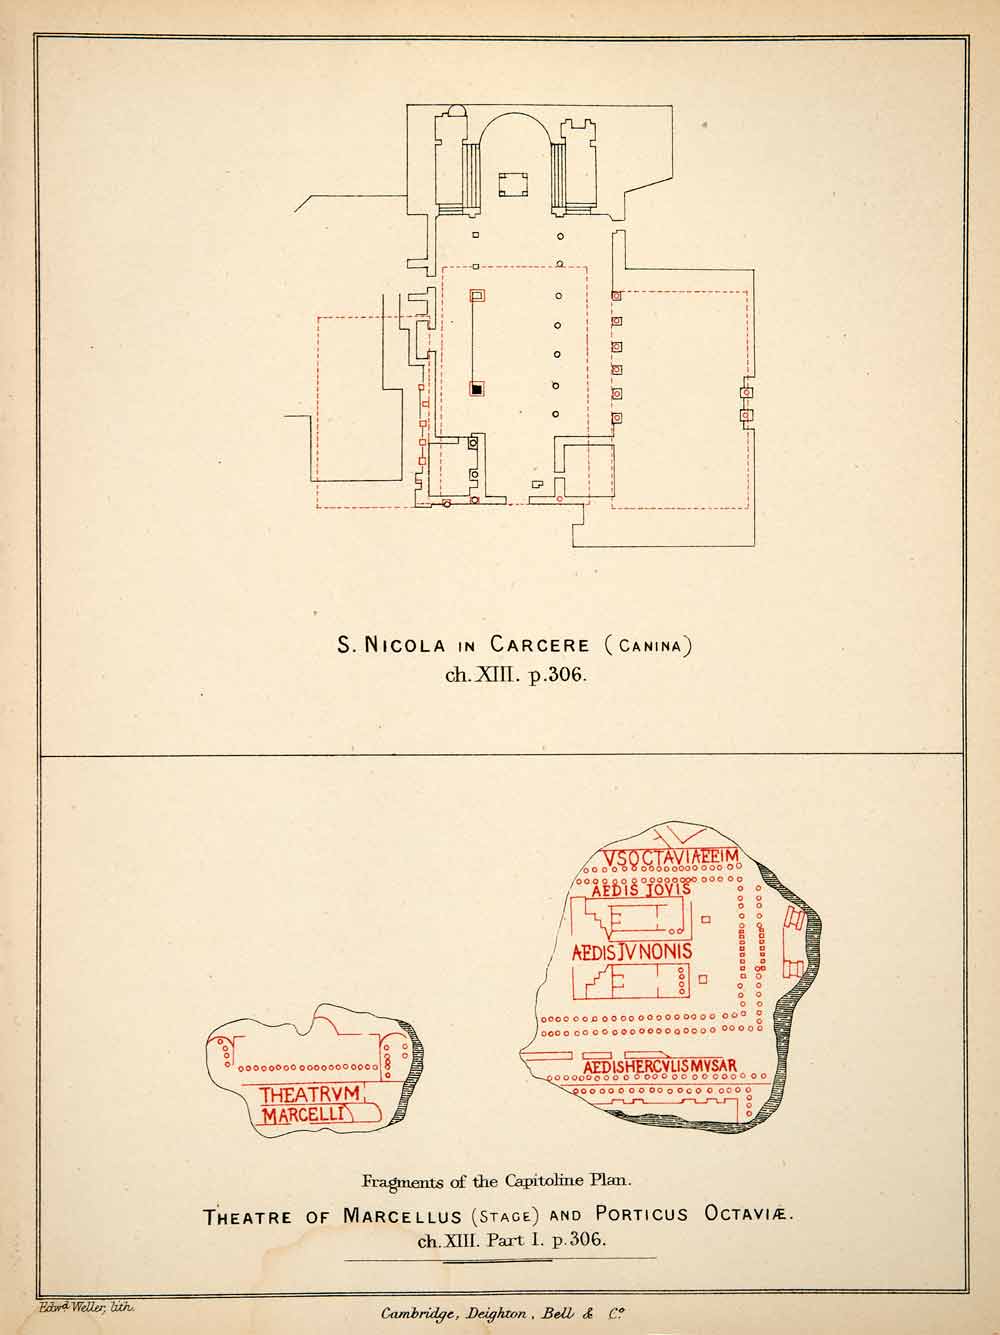 1876 Lithograph Layout San Nicola Carcere Fragment Capitoline Plan Theatre XGYA9